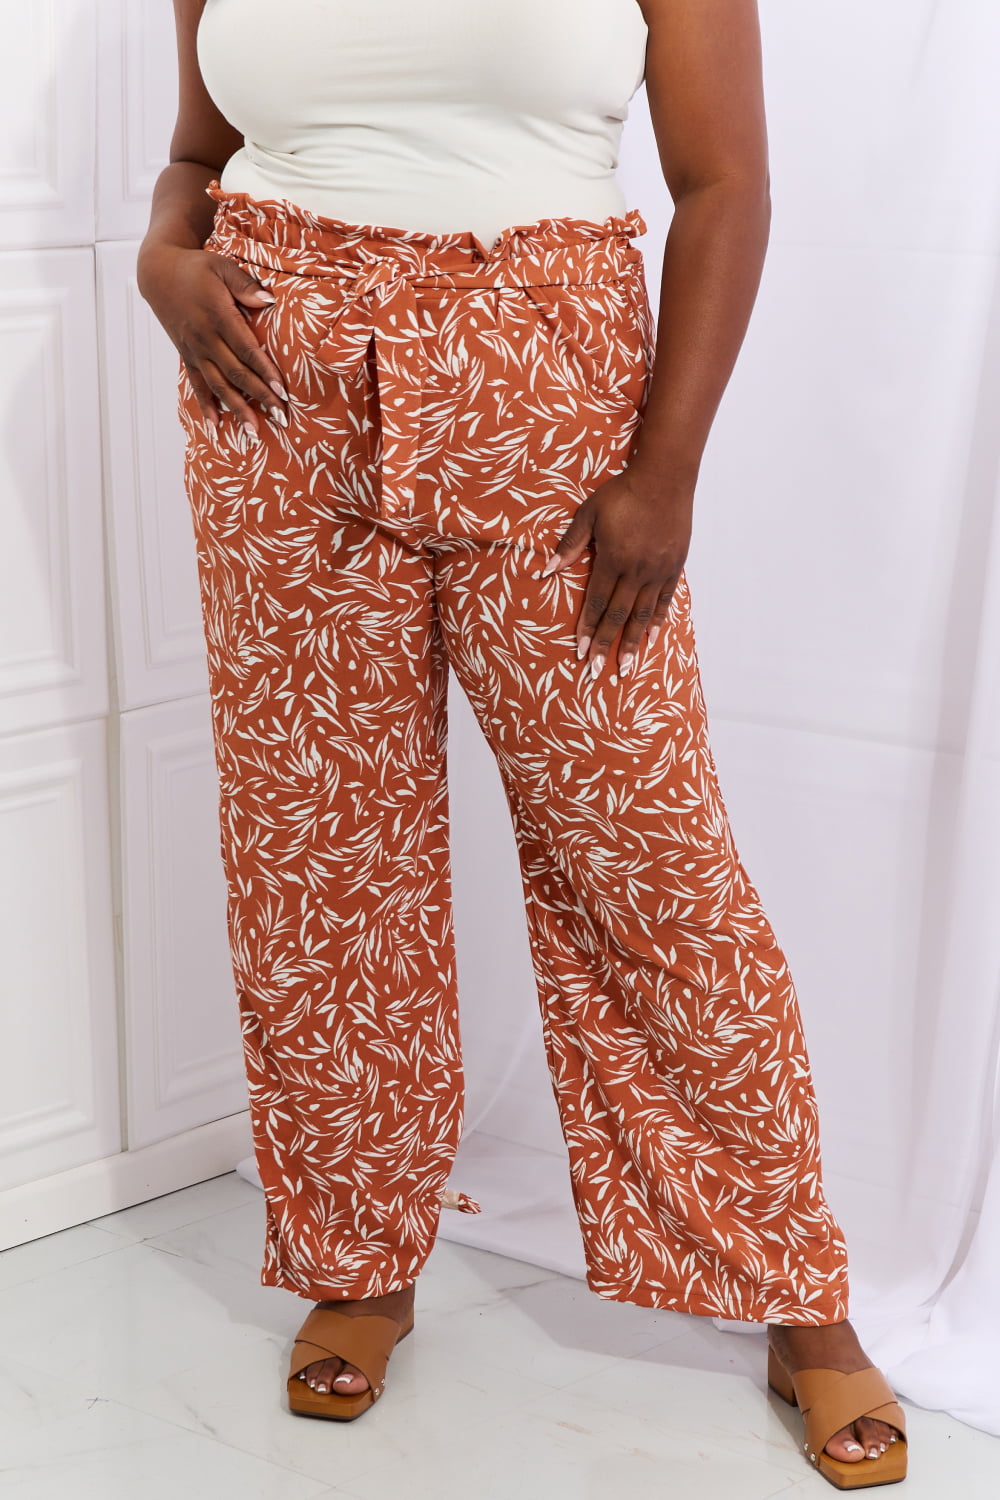 Right Angle Full Size Geometric Printed Pants in Red Orange - Bottoms - Pants - 6 - 2024